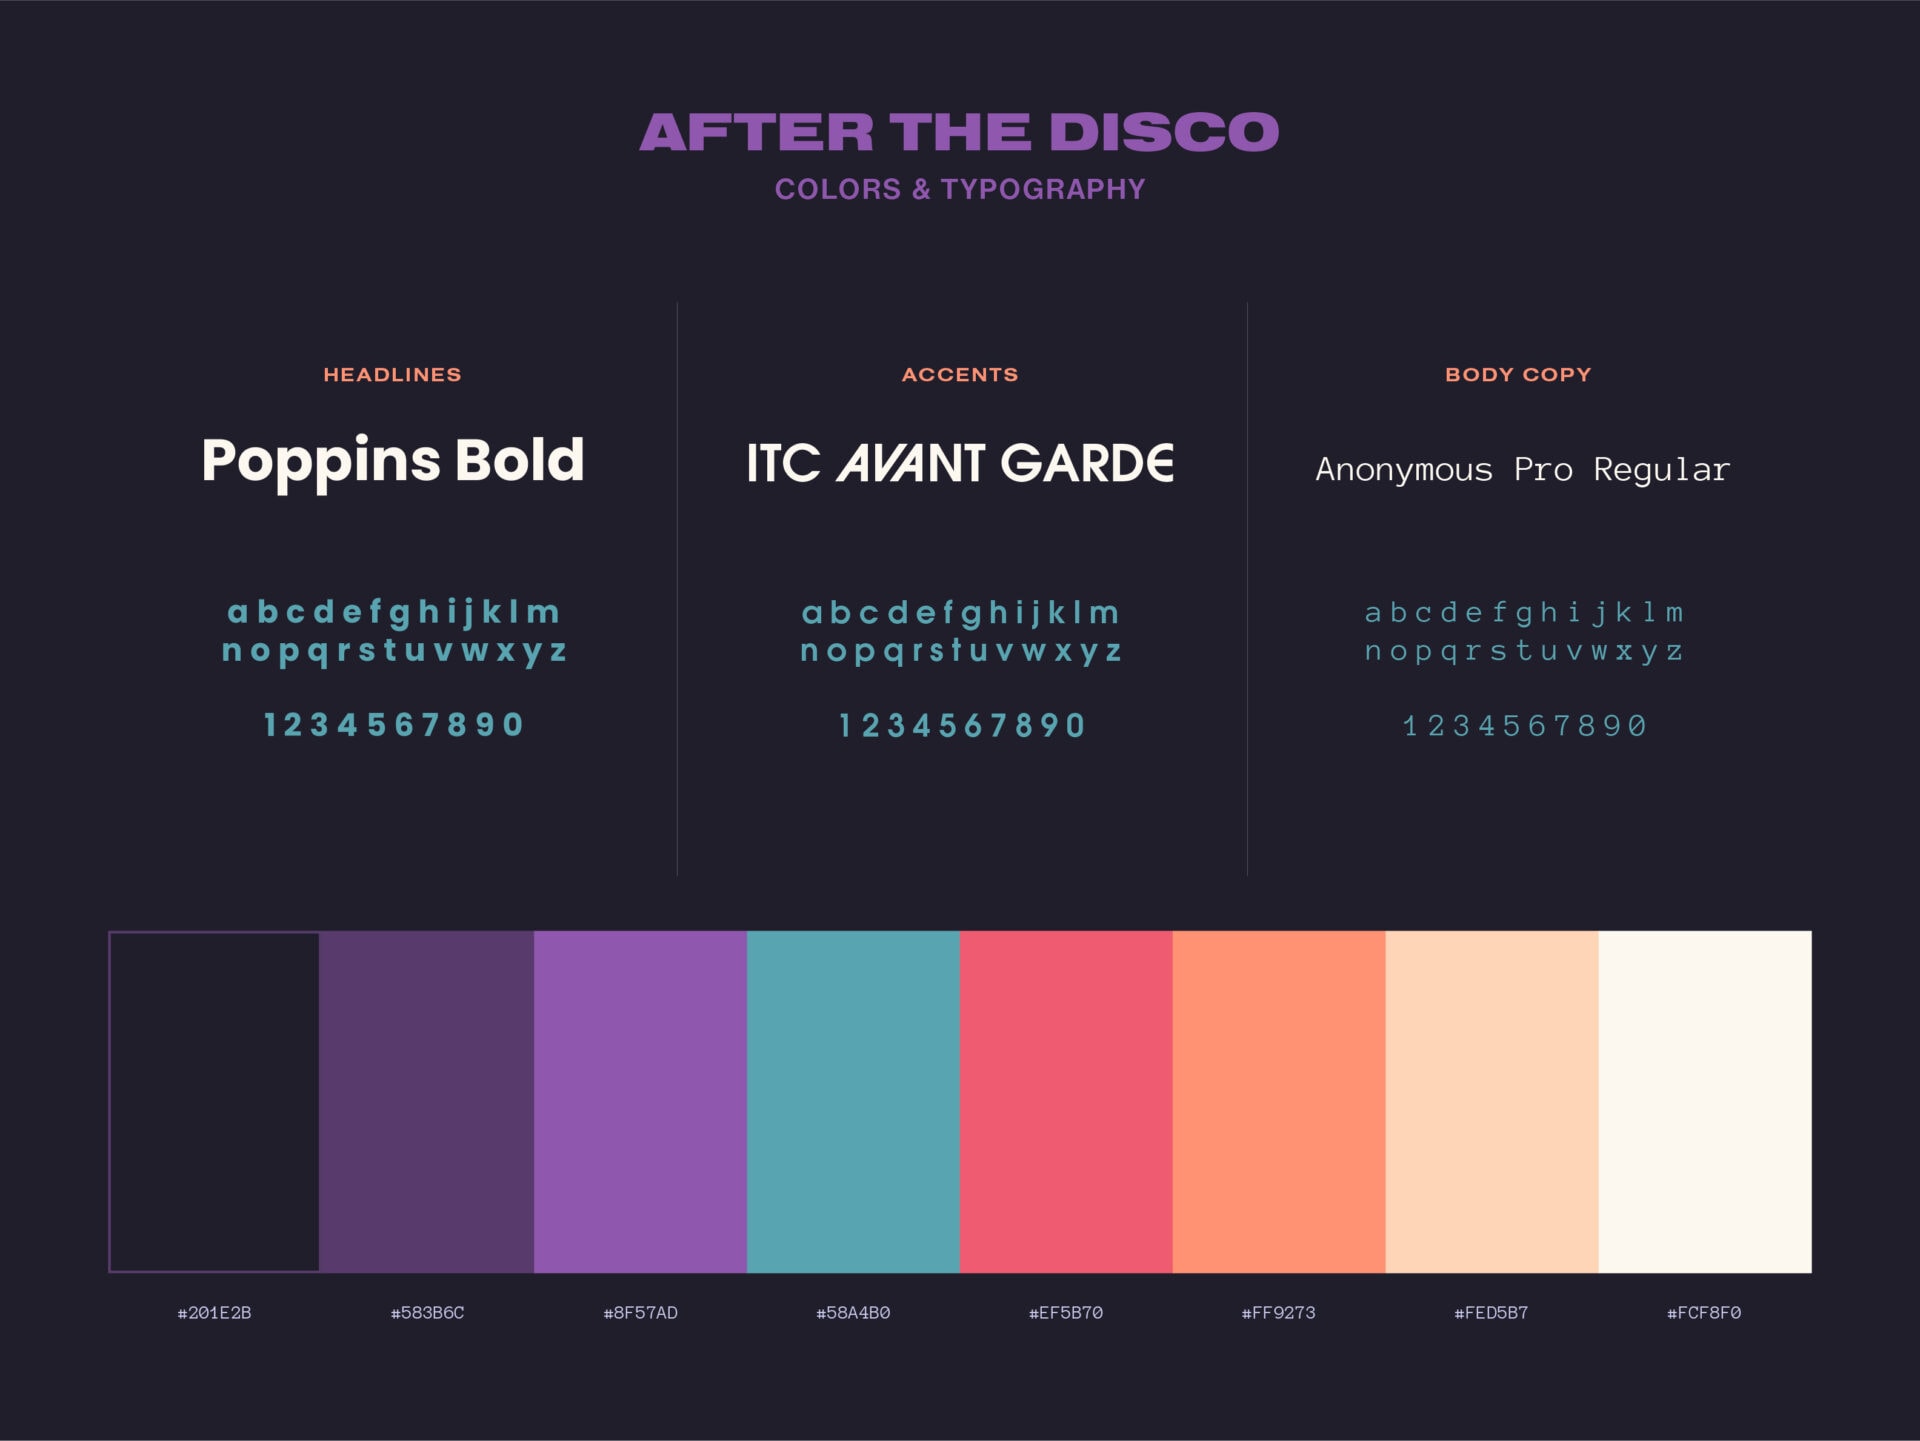 After the Disco colors